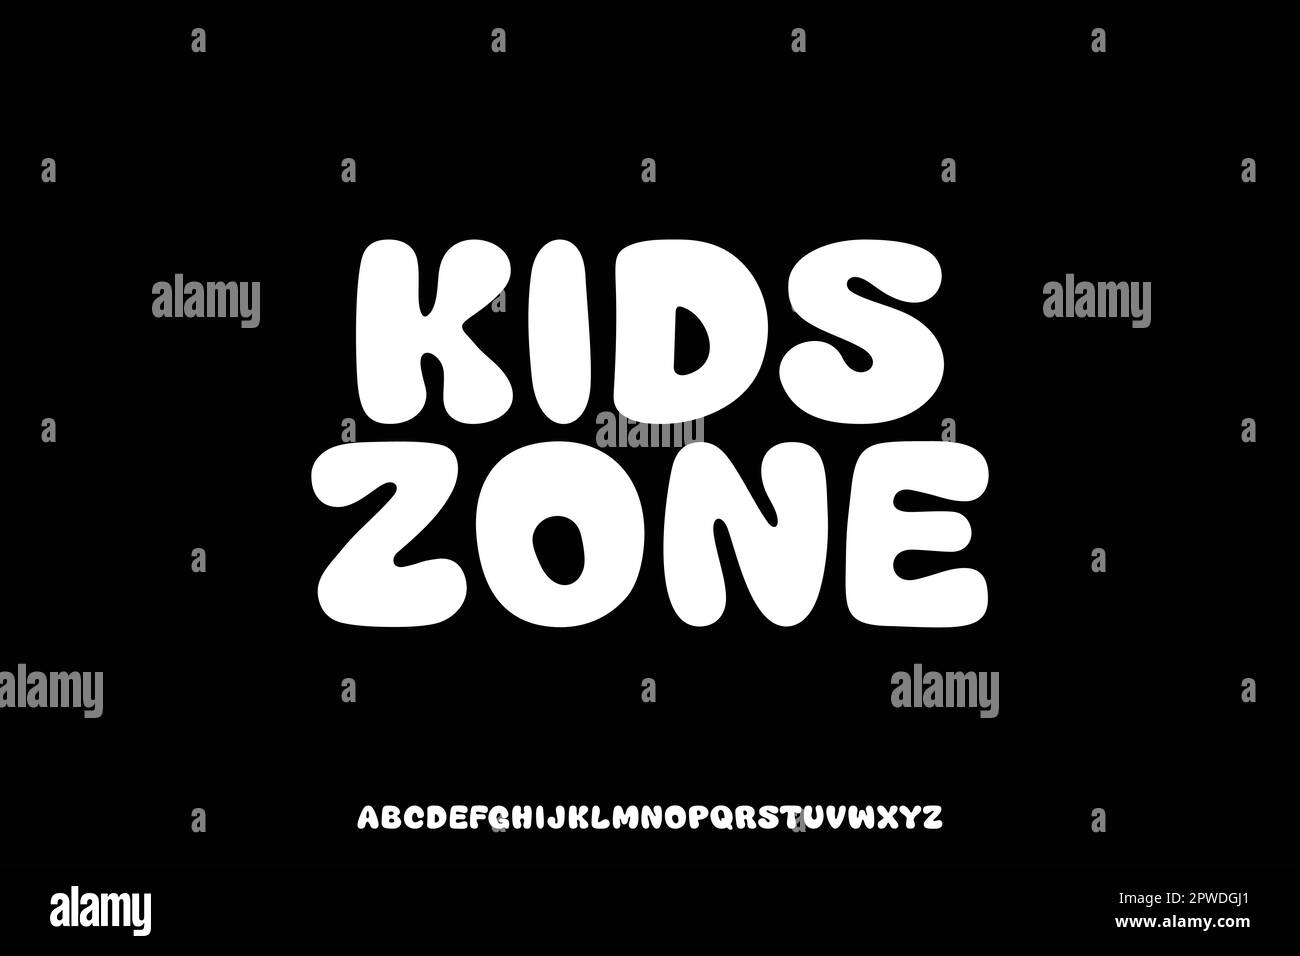 Creative playful rounded kids alphabets vector Stock Vector